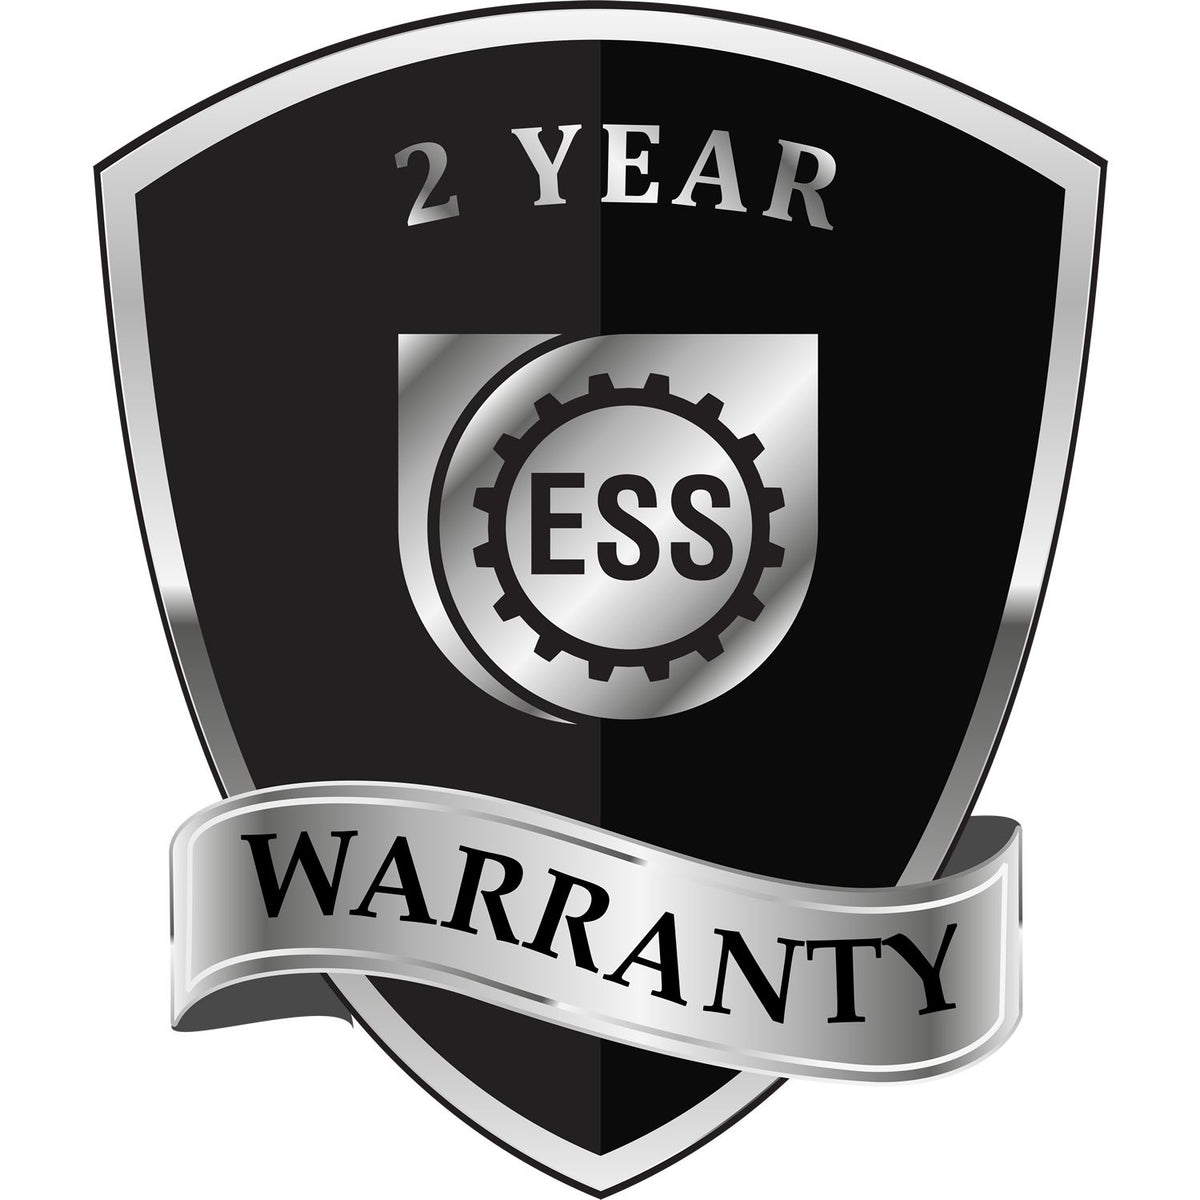 A black and silver badge or emblem showing warranty information for the Gift Florida Architect Seal